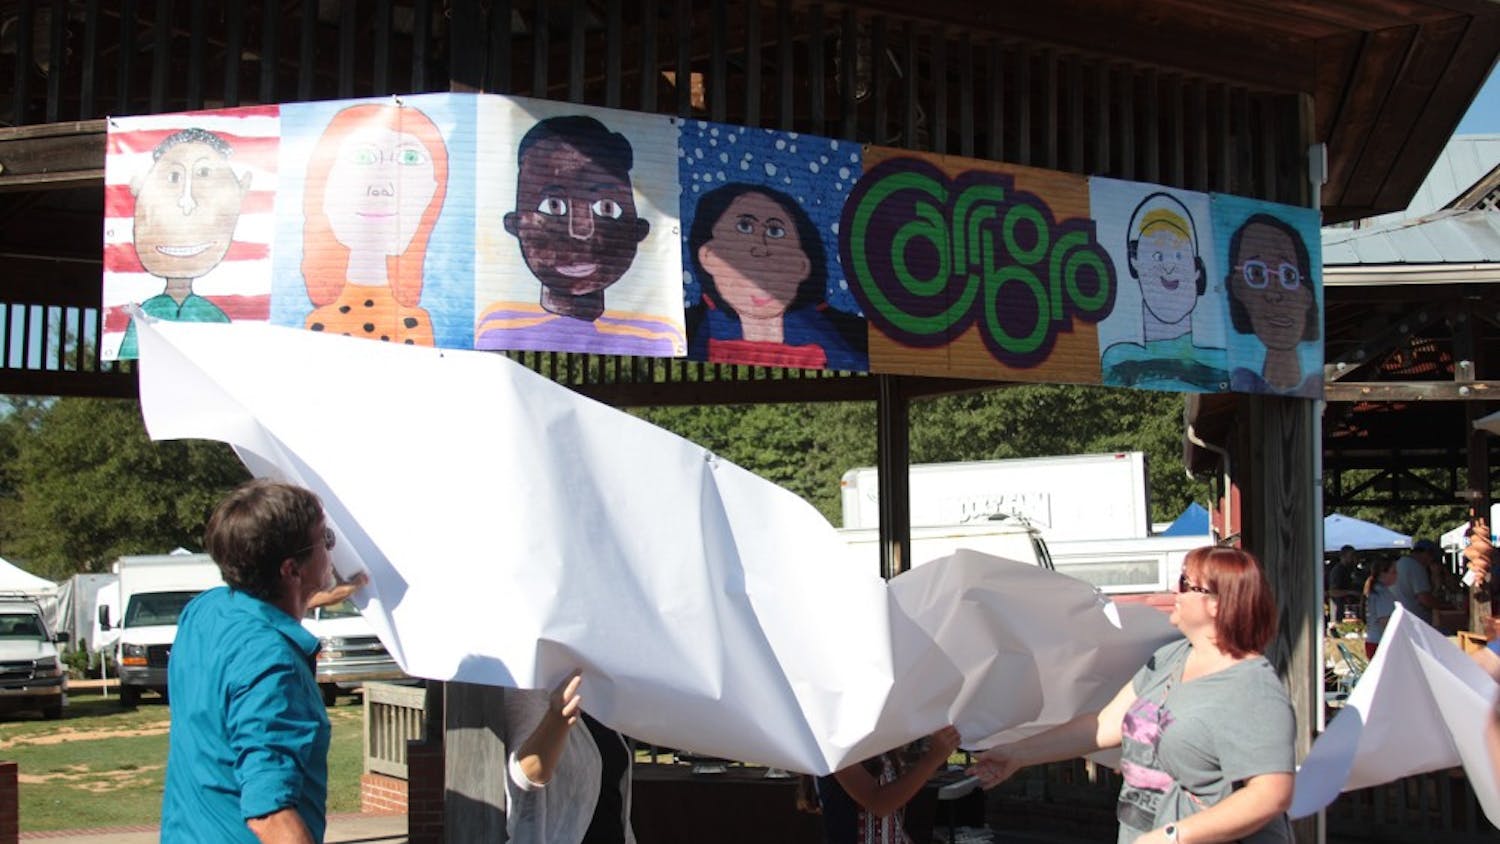 Mural artist Michael Brown (far left) and Carrboro Elementary School teacher Deb Cox (far right) help unveil a replica of the mural at the dedication ceremony in the Carrboro Town Commons on Saturday.